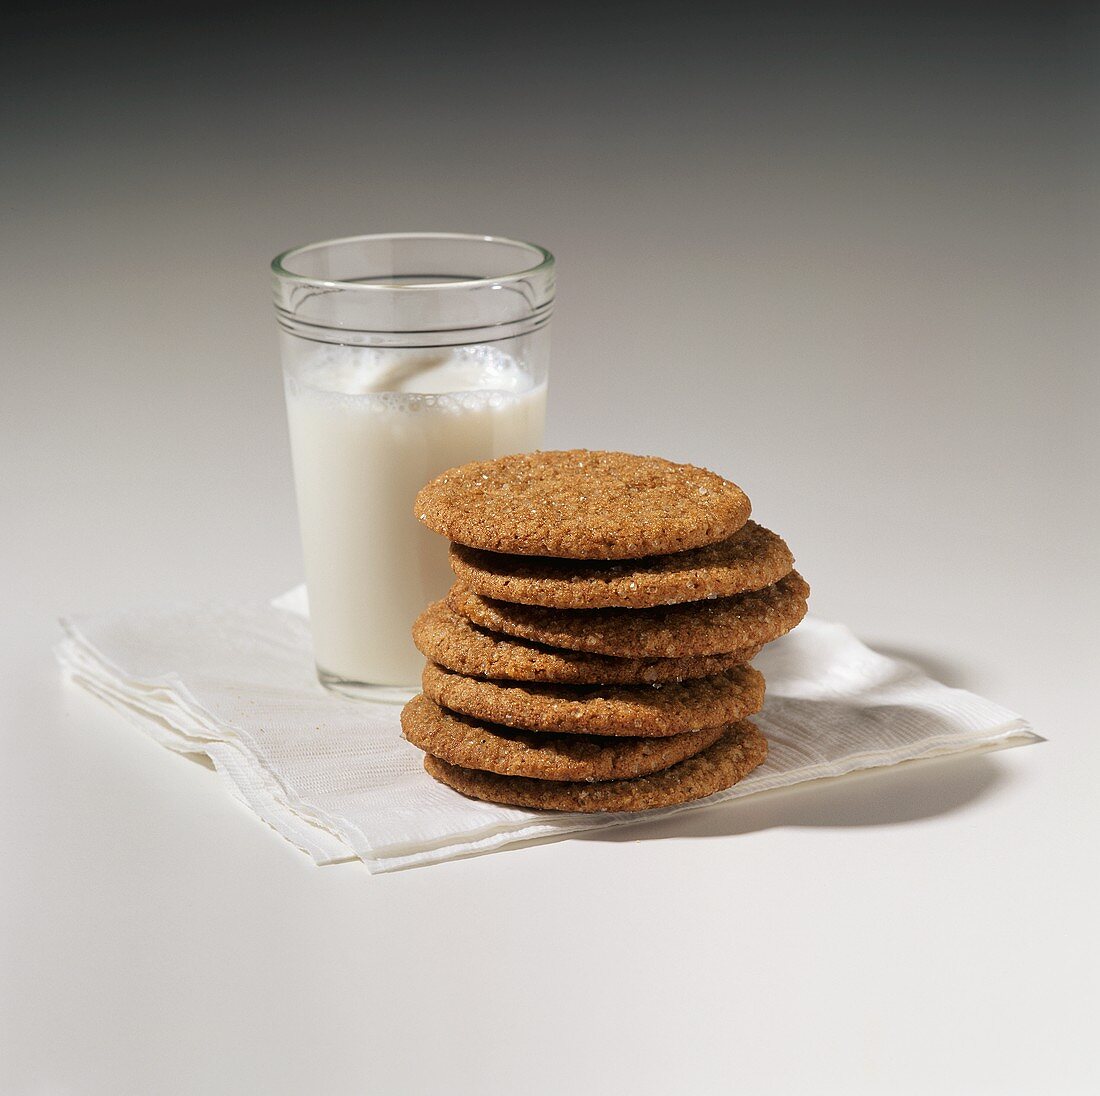 Ginger Molasses Cookies with a Glass of Milk